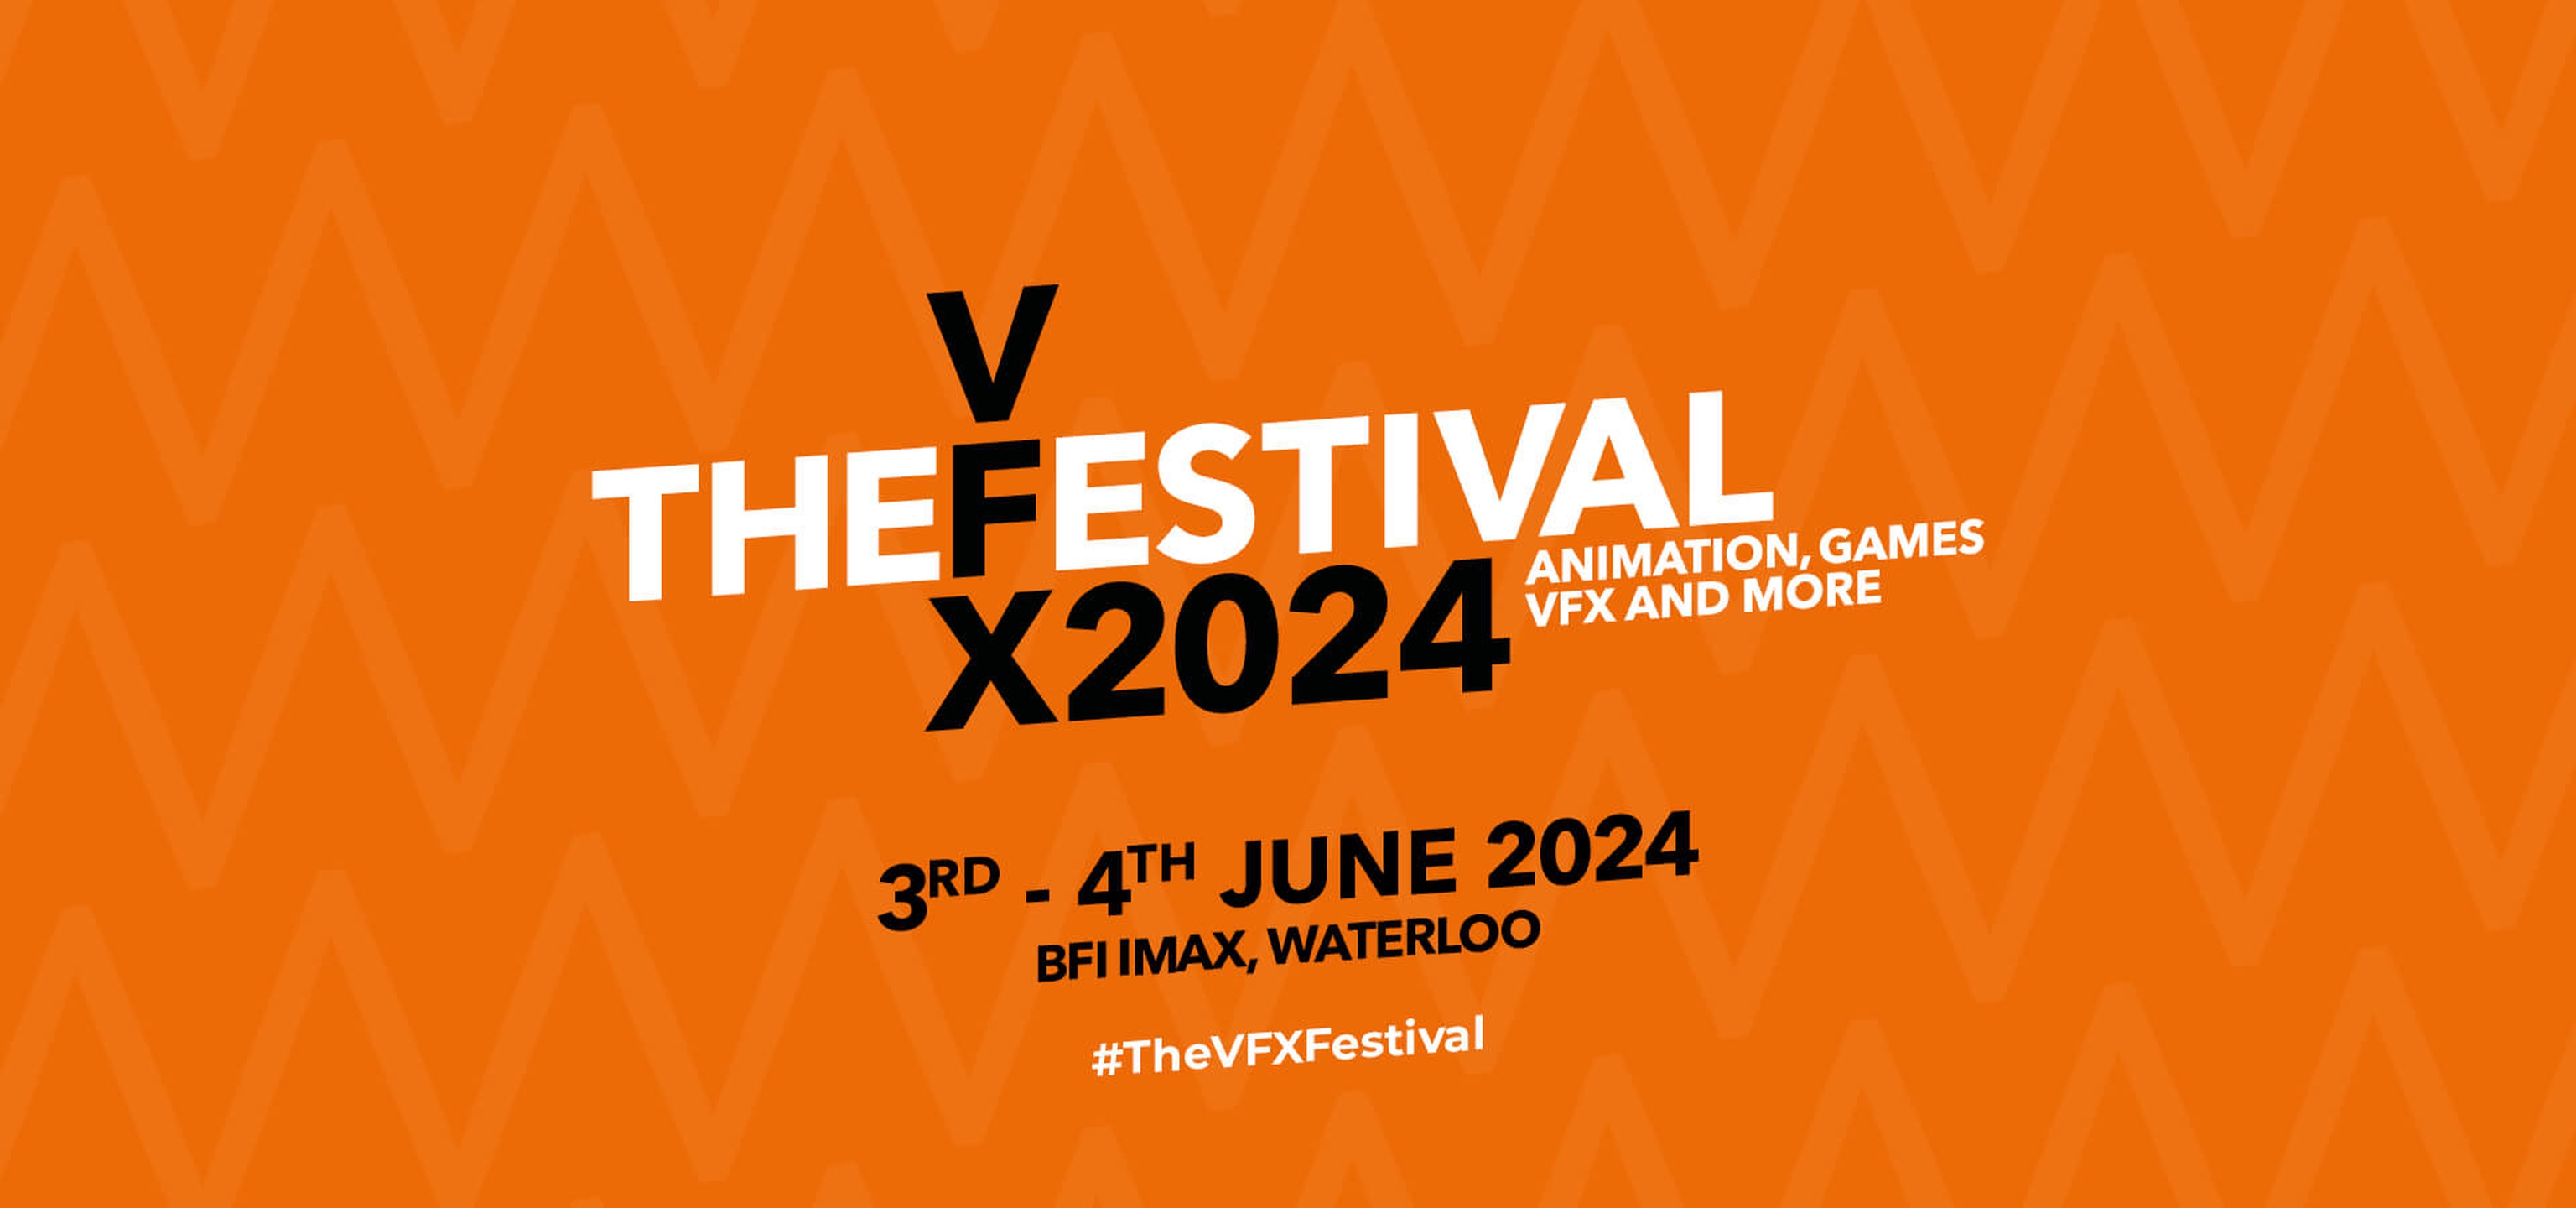 The VFX Festival 2024. Animation, Games, VFX and more. 3rd - 4th June 2024. BFI IMAX, Waterloo. #TheVFXFestival